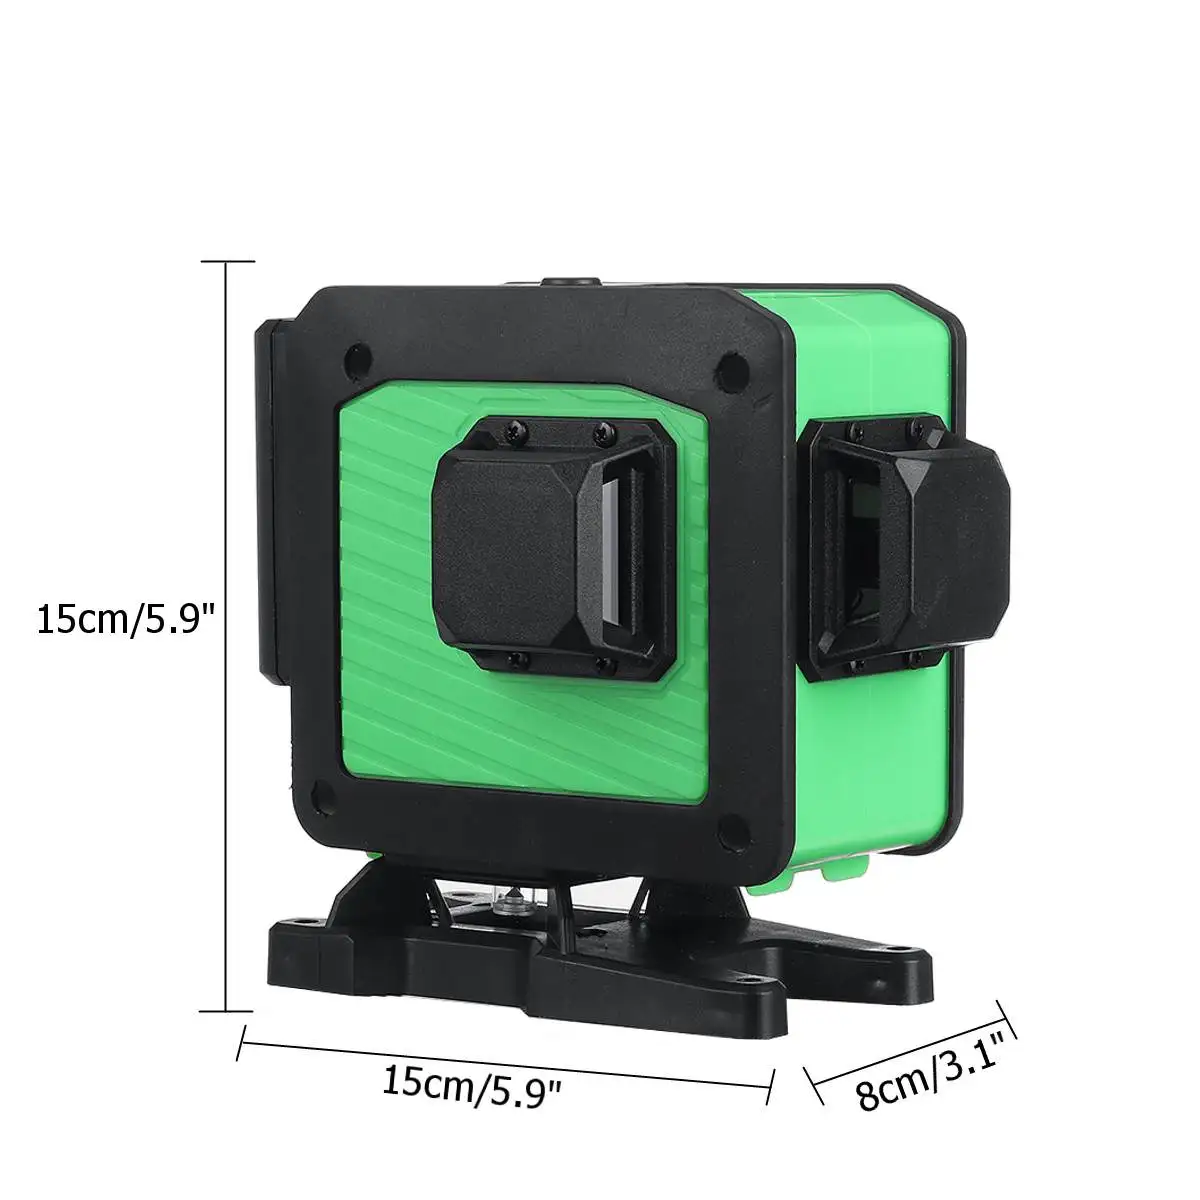 

4000mAh Laser Level 12 Lines 3D Self-Leveling 360 Horizontal And Vertical Cross Super Powerful Green Laser Beam Line